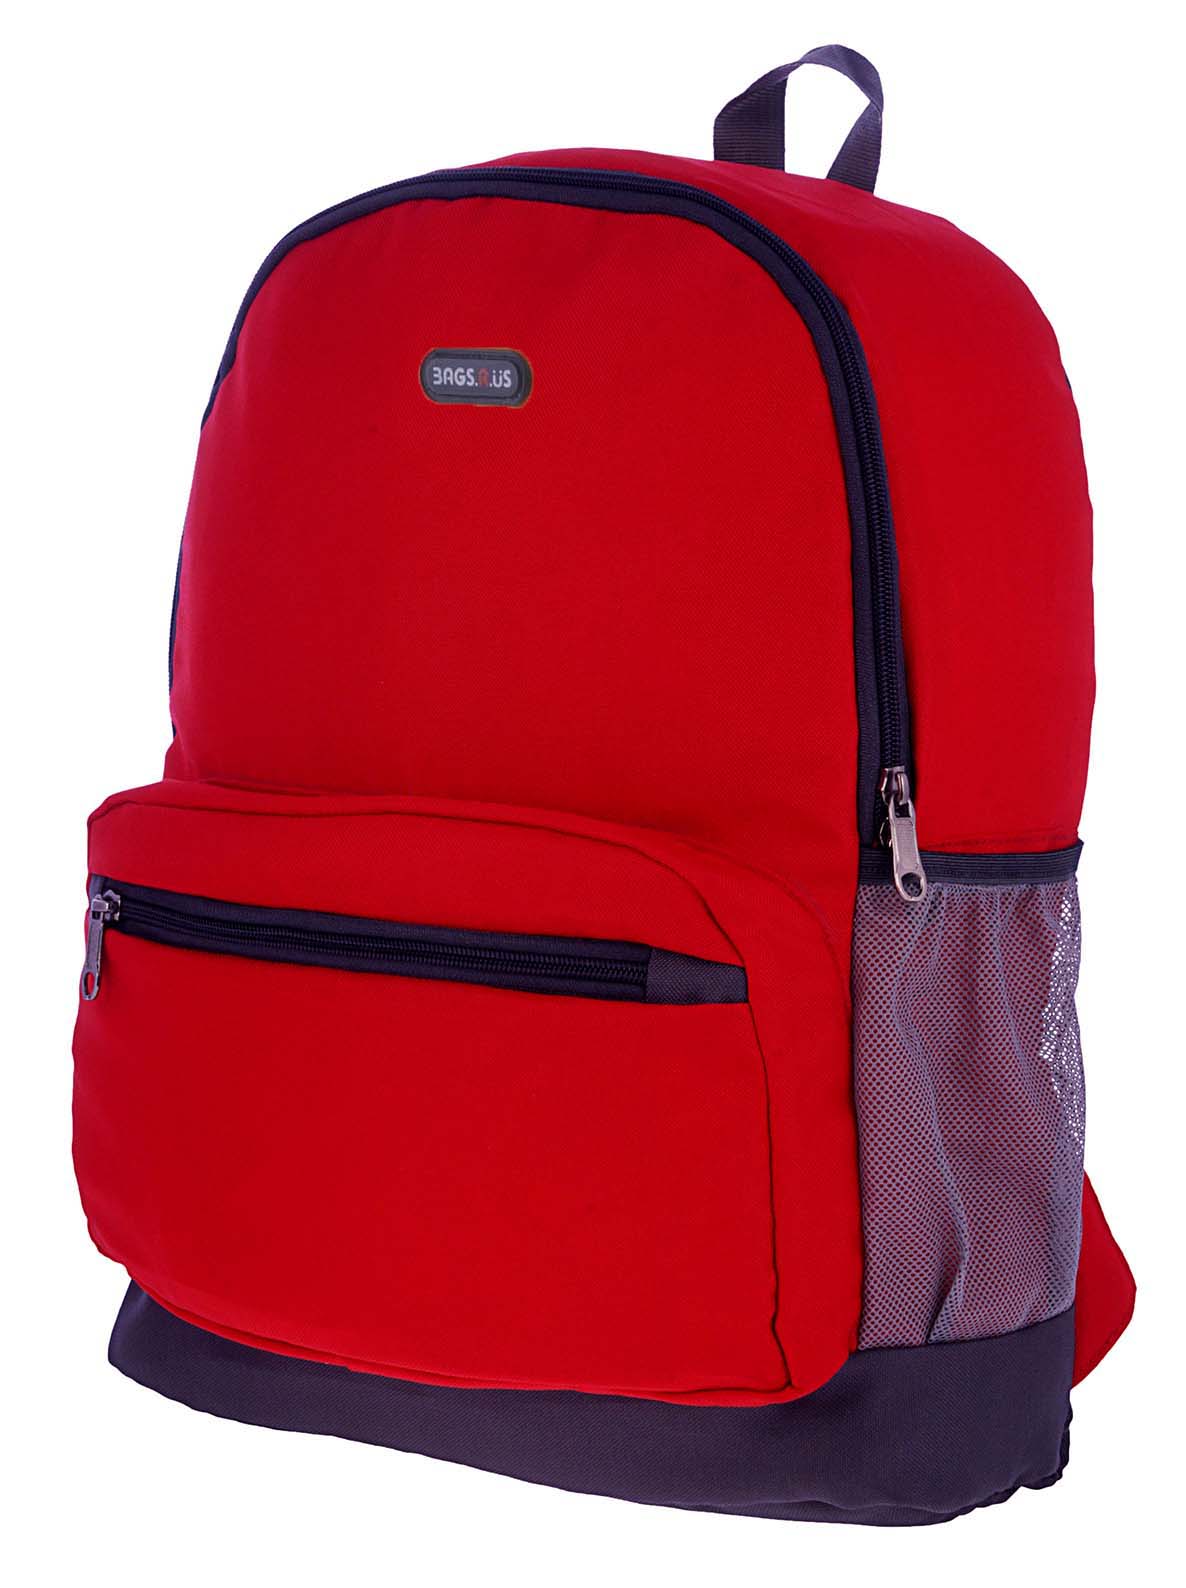 Buy bagsRus Red Universal Backpack Online @ ₹750 from ShopClues